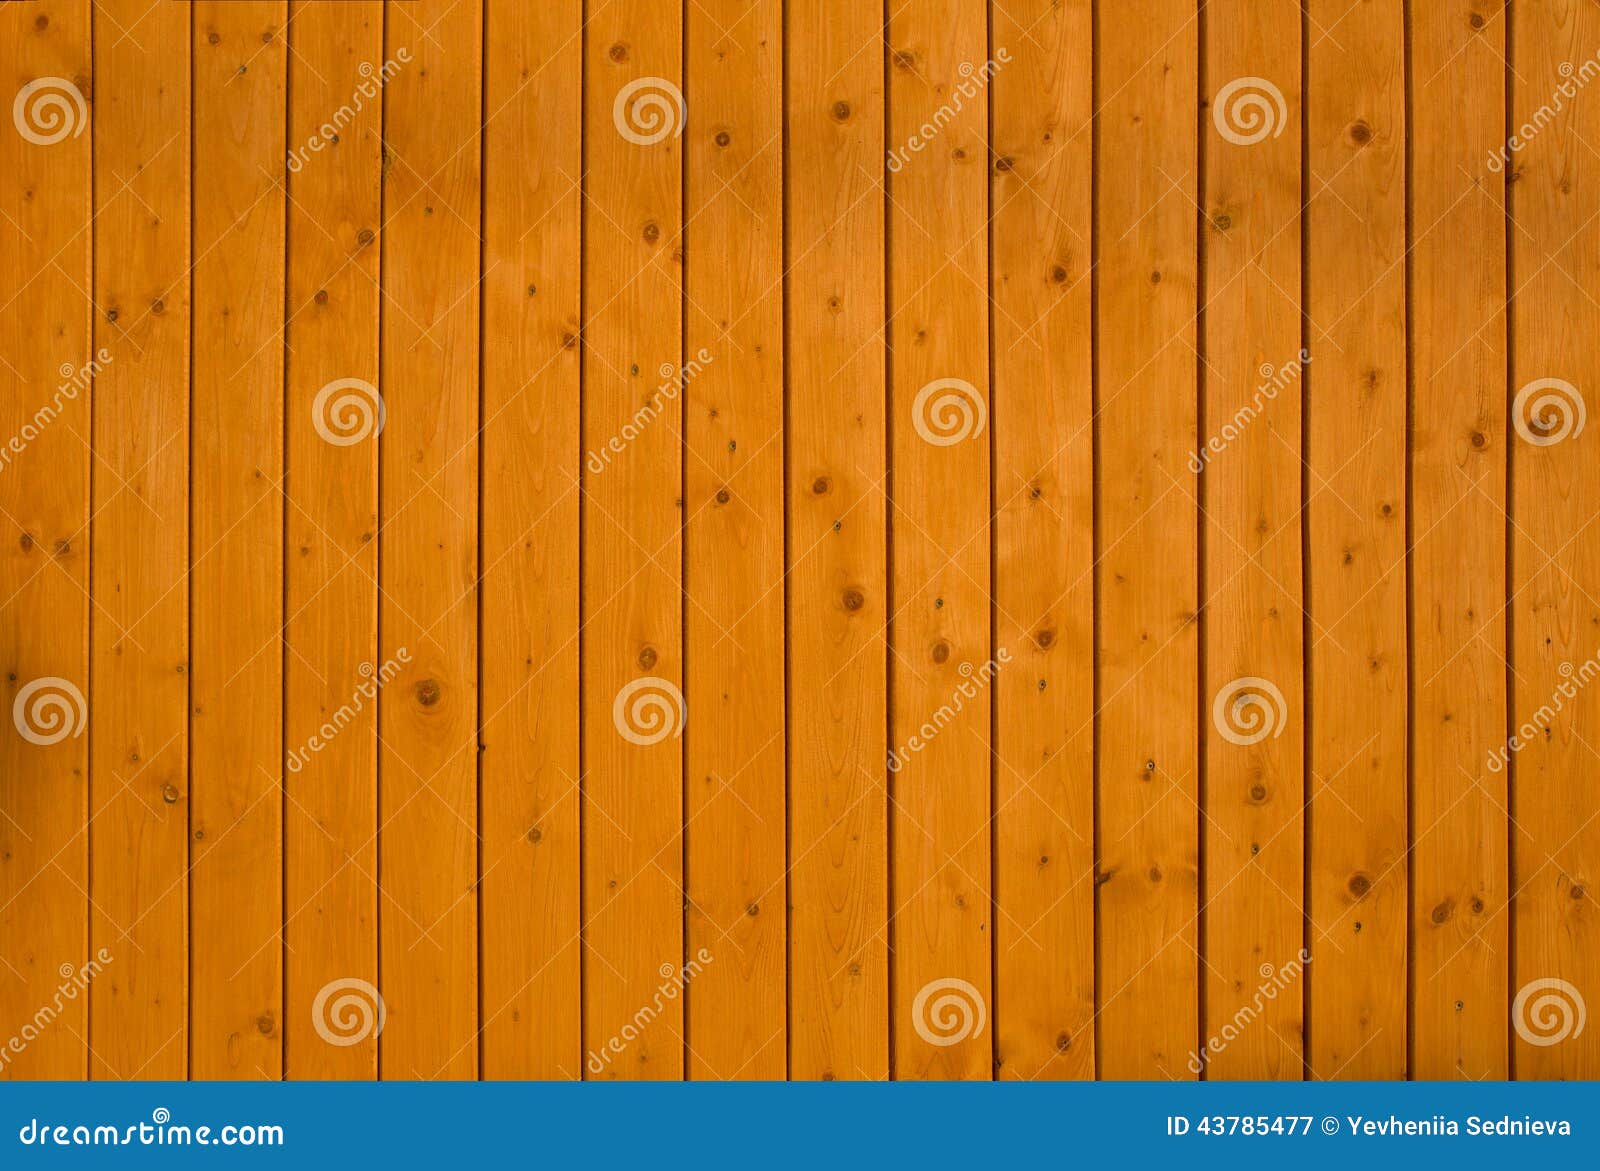 lacquered wood background